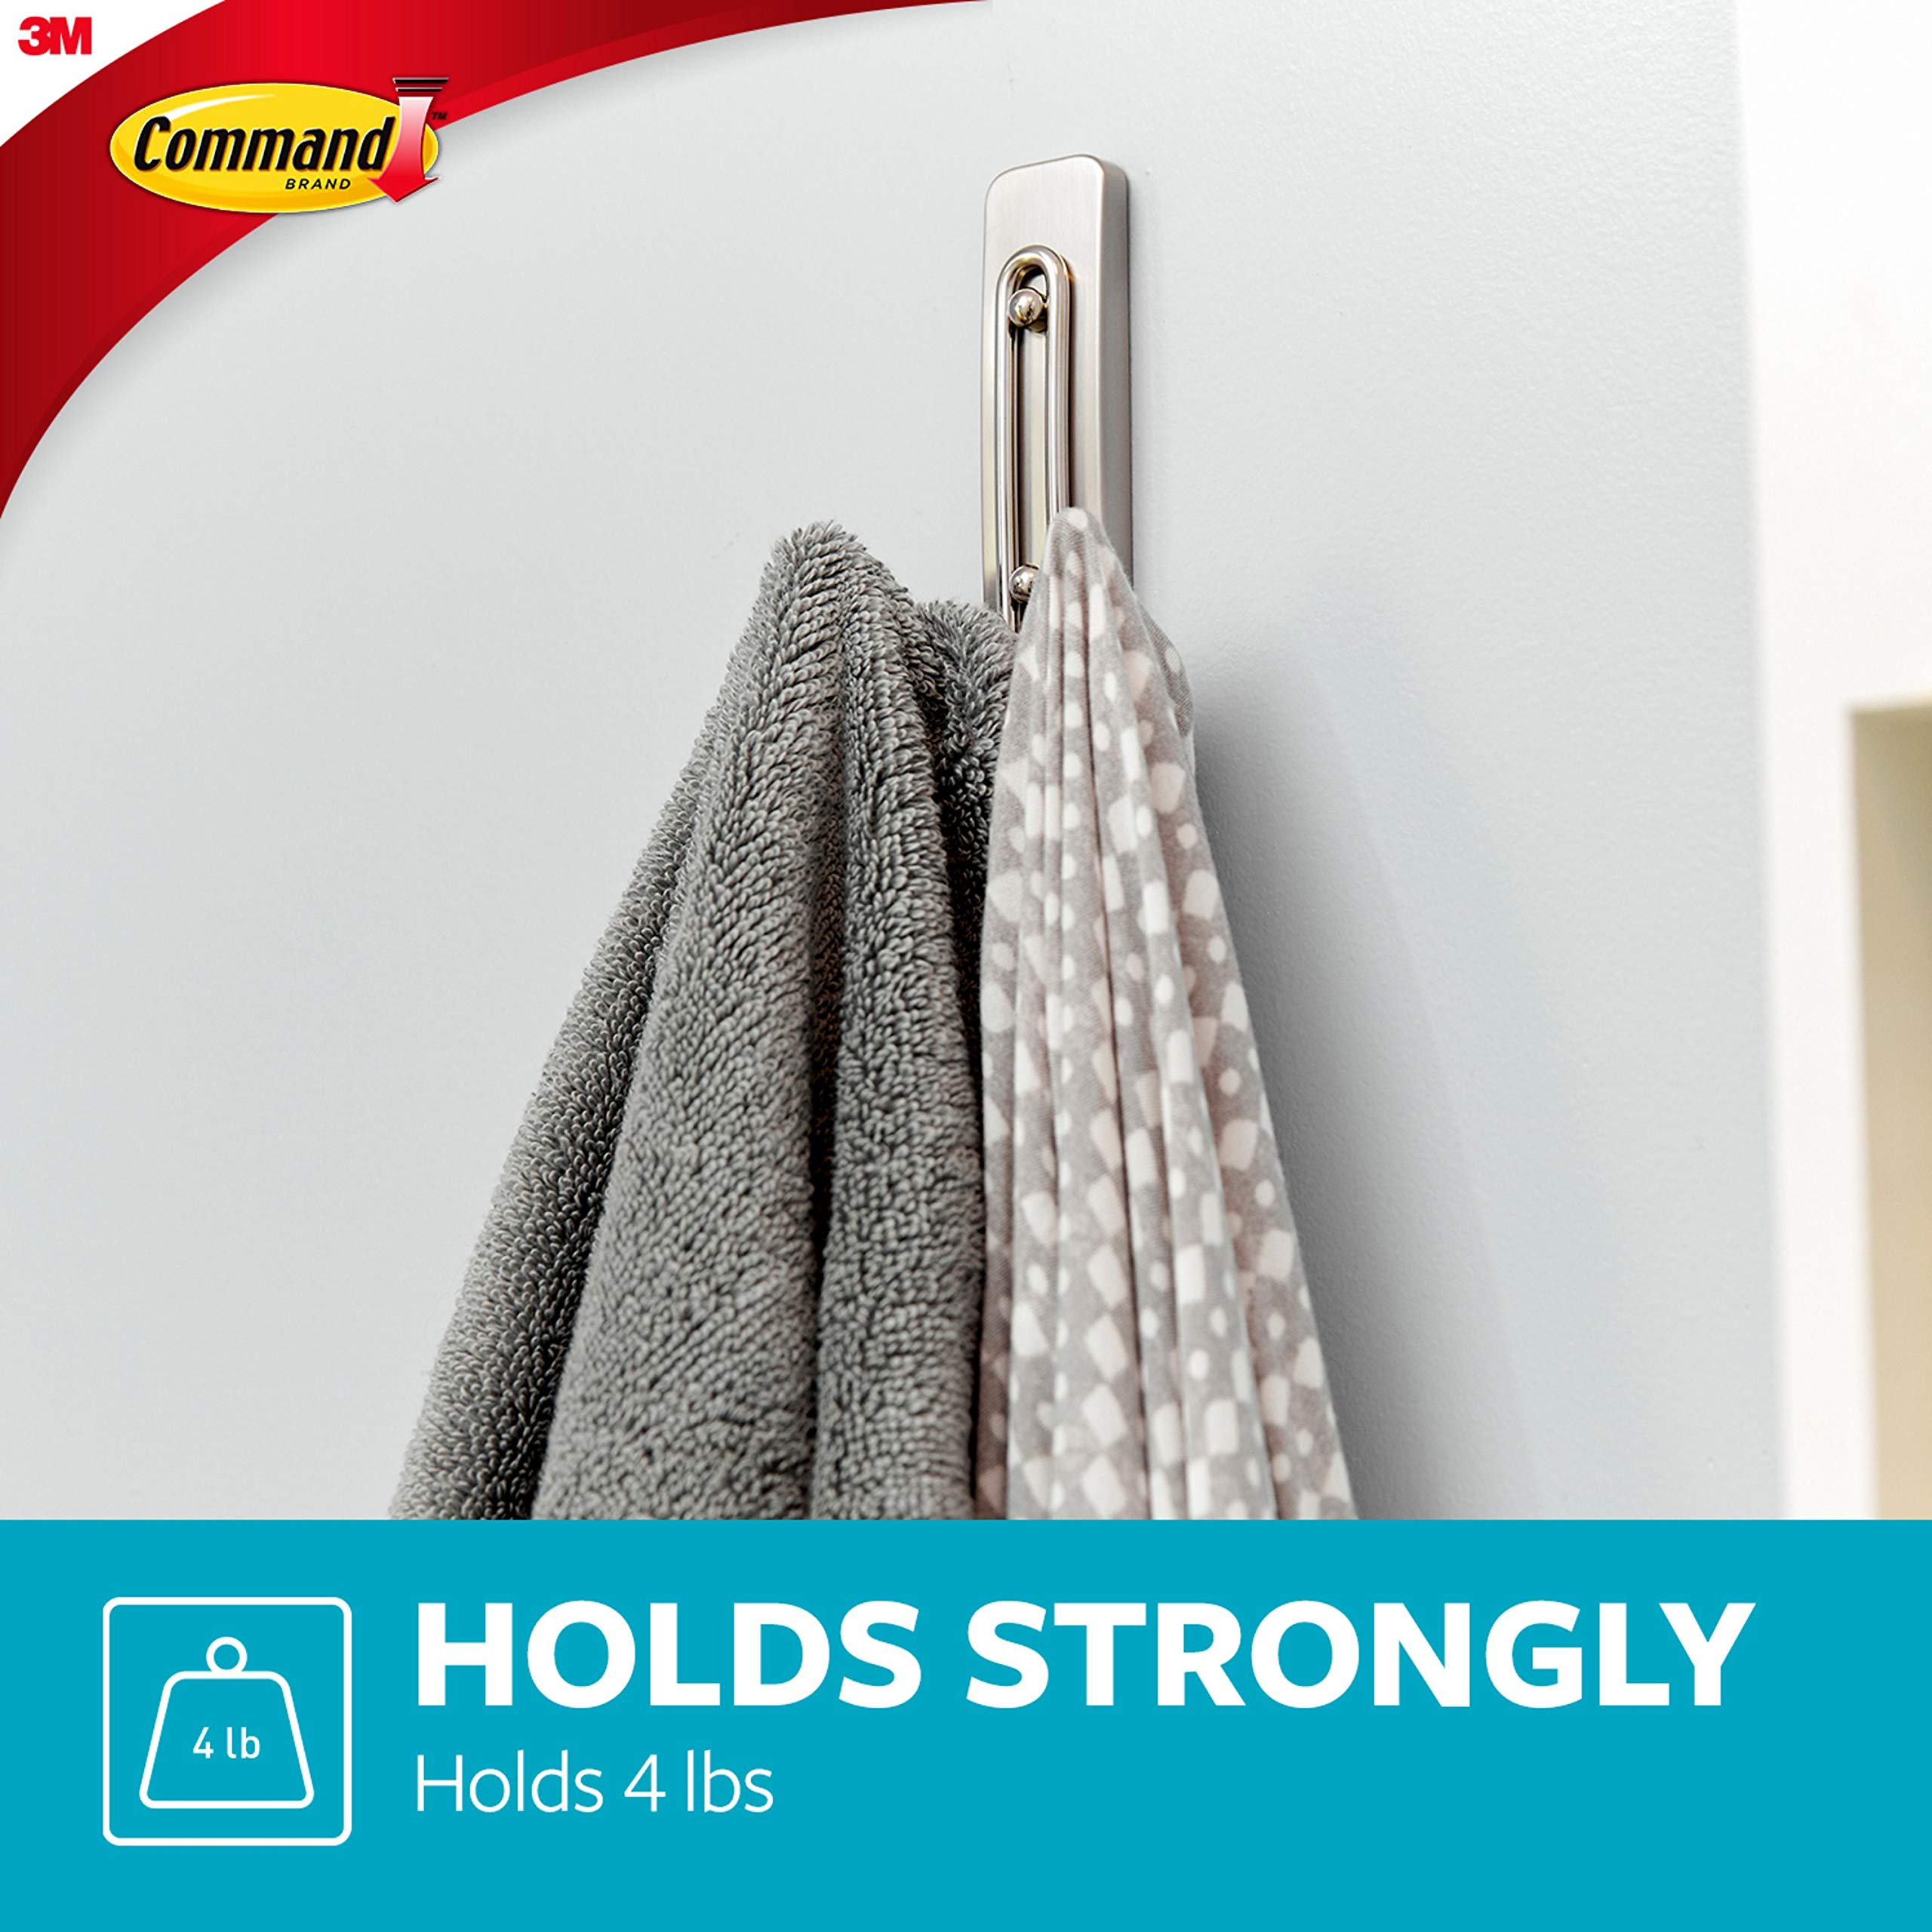 Command Large Double Bathroom Wall Hook, Damage Free Hanging Bath Hook with Adhesive Strip, Double Hook for Hanging Bath Towels, 1 Satin Nickel Colored Wall Hook and 1 Water-Resistant Command Strip, 0